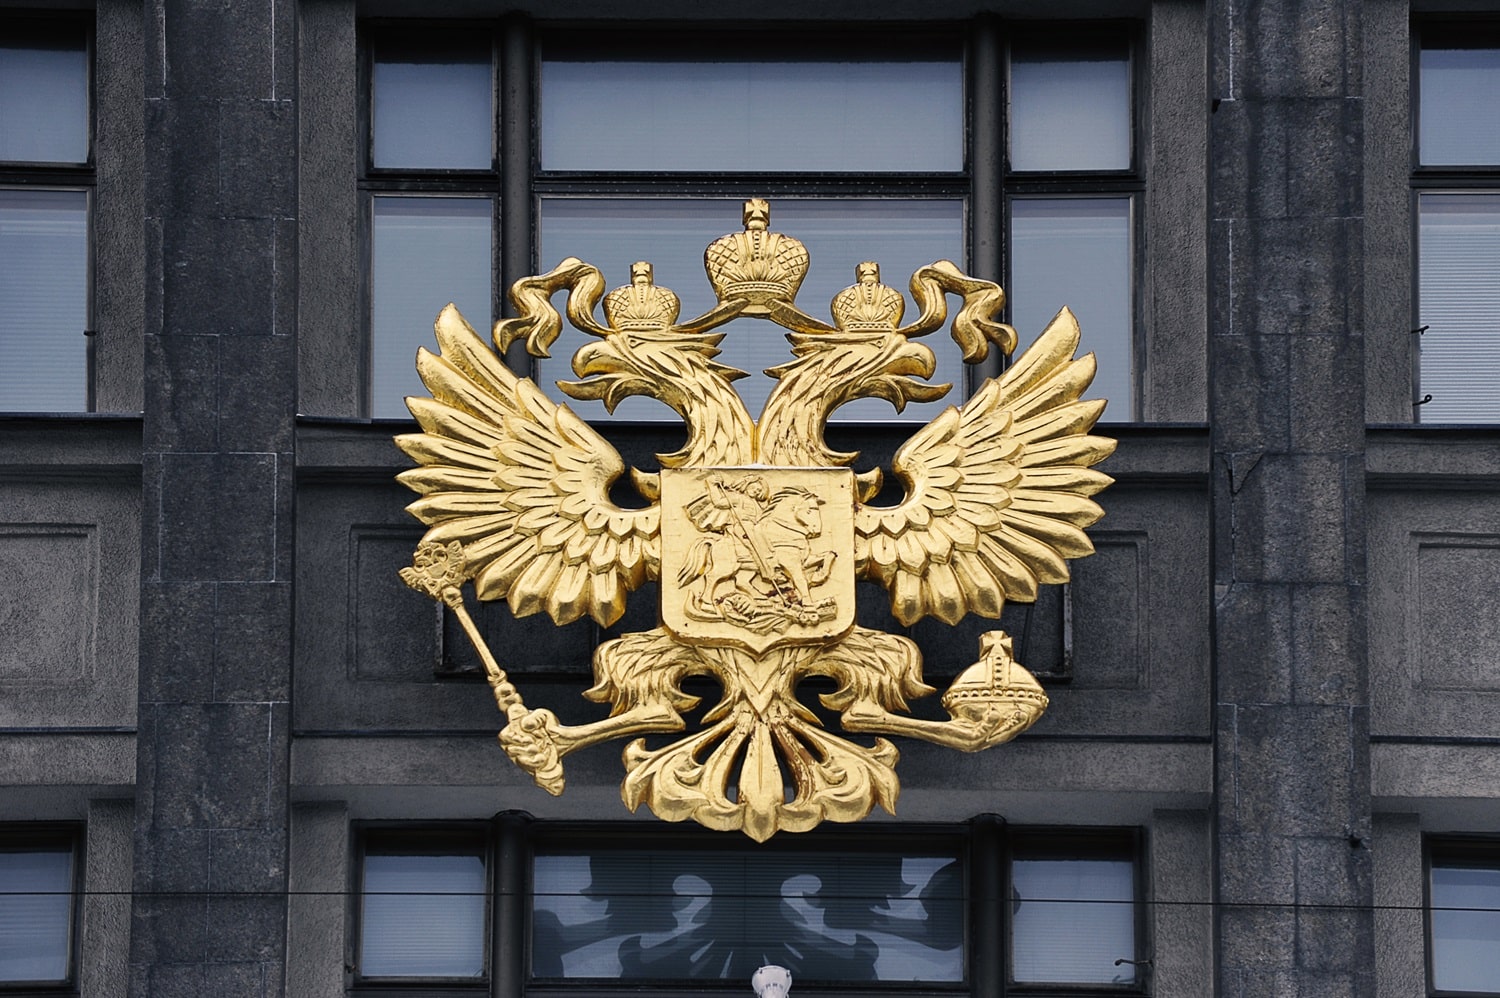 The Russian coat of arms on the State Duma building in Moscow, Russia.